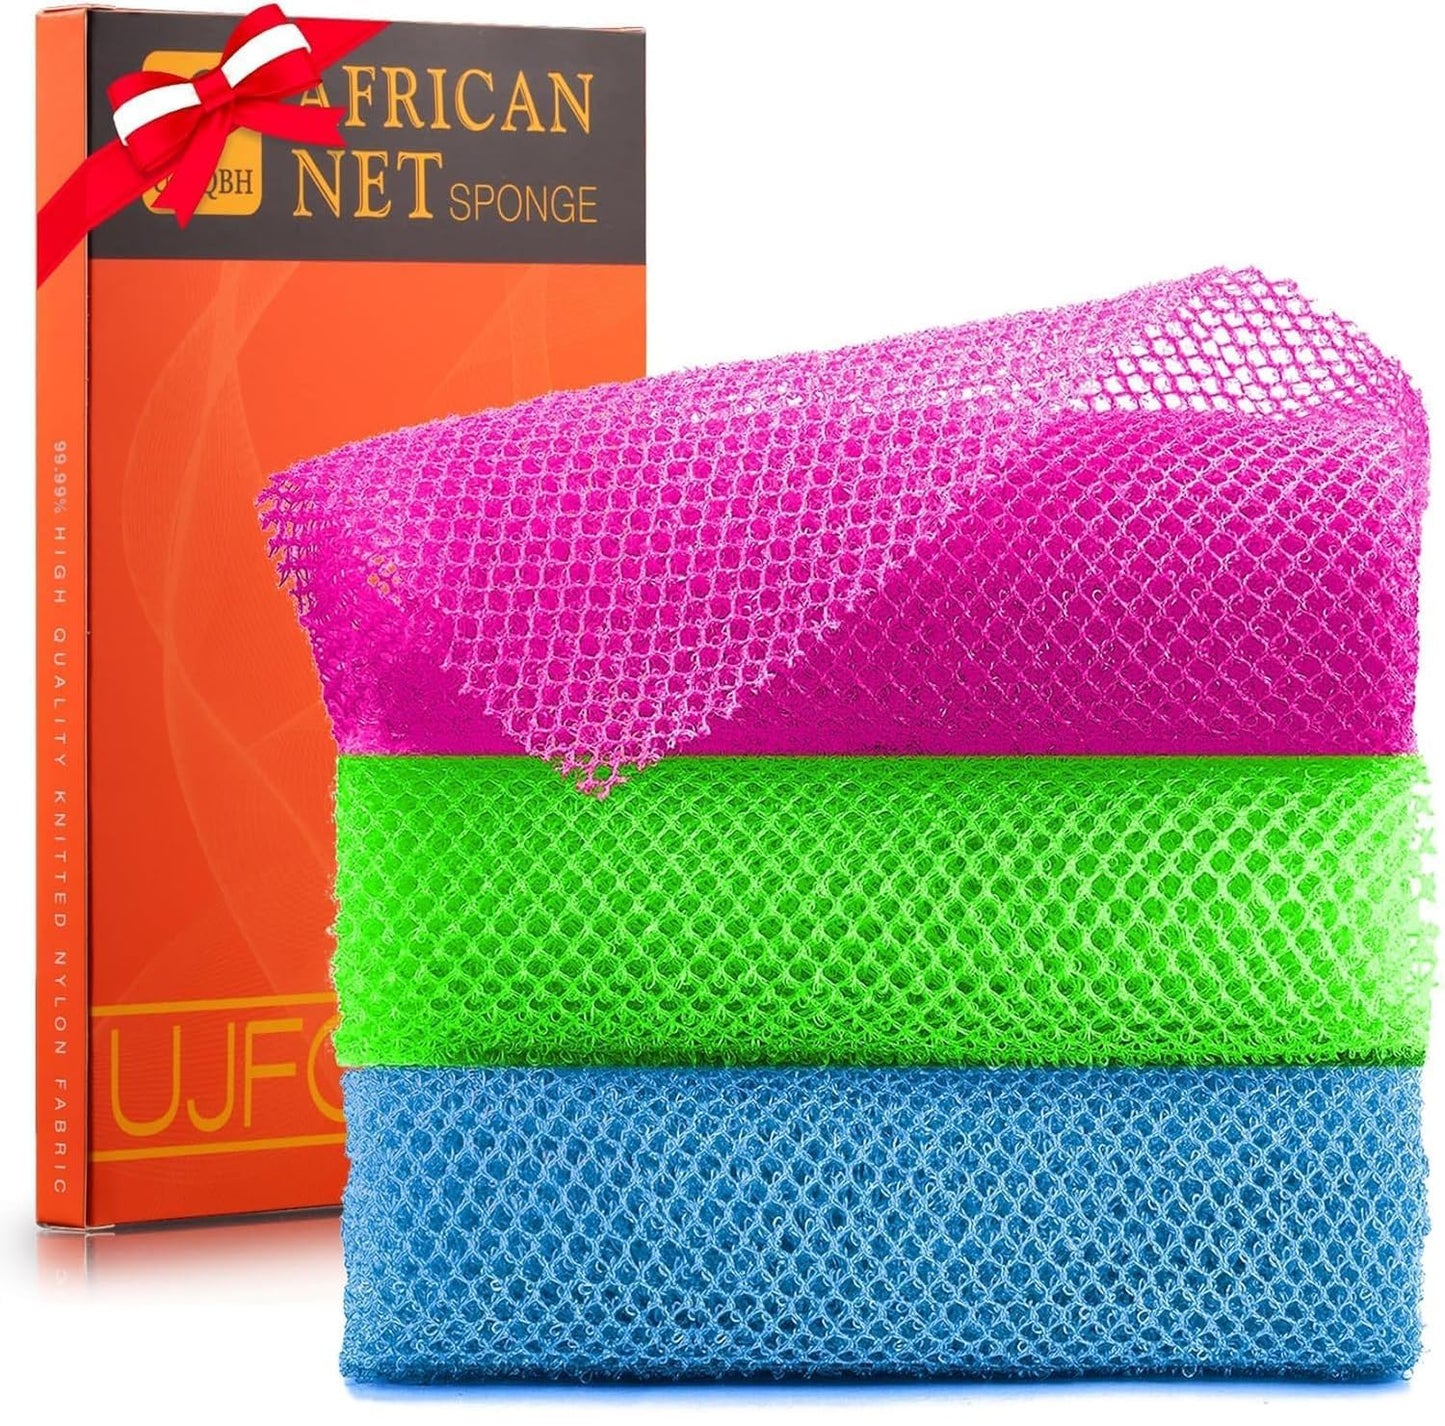 3 Pieces African Bath Sponge African Net Long Net Bath Sponge Exfoliating Shower Body Scrubber Back Scrubber Skin Smoother,Great for Daily Use (Rose Red, Blue, Green)